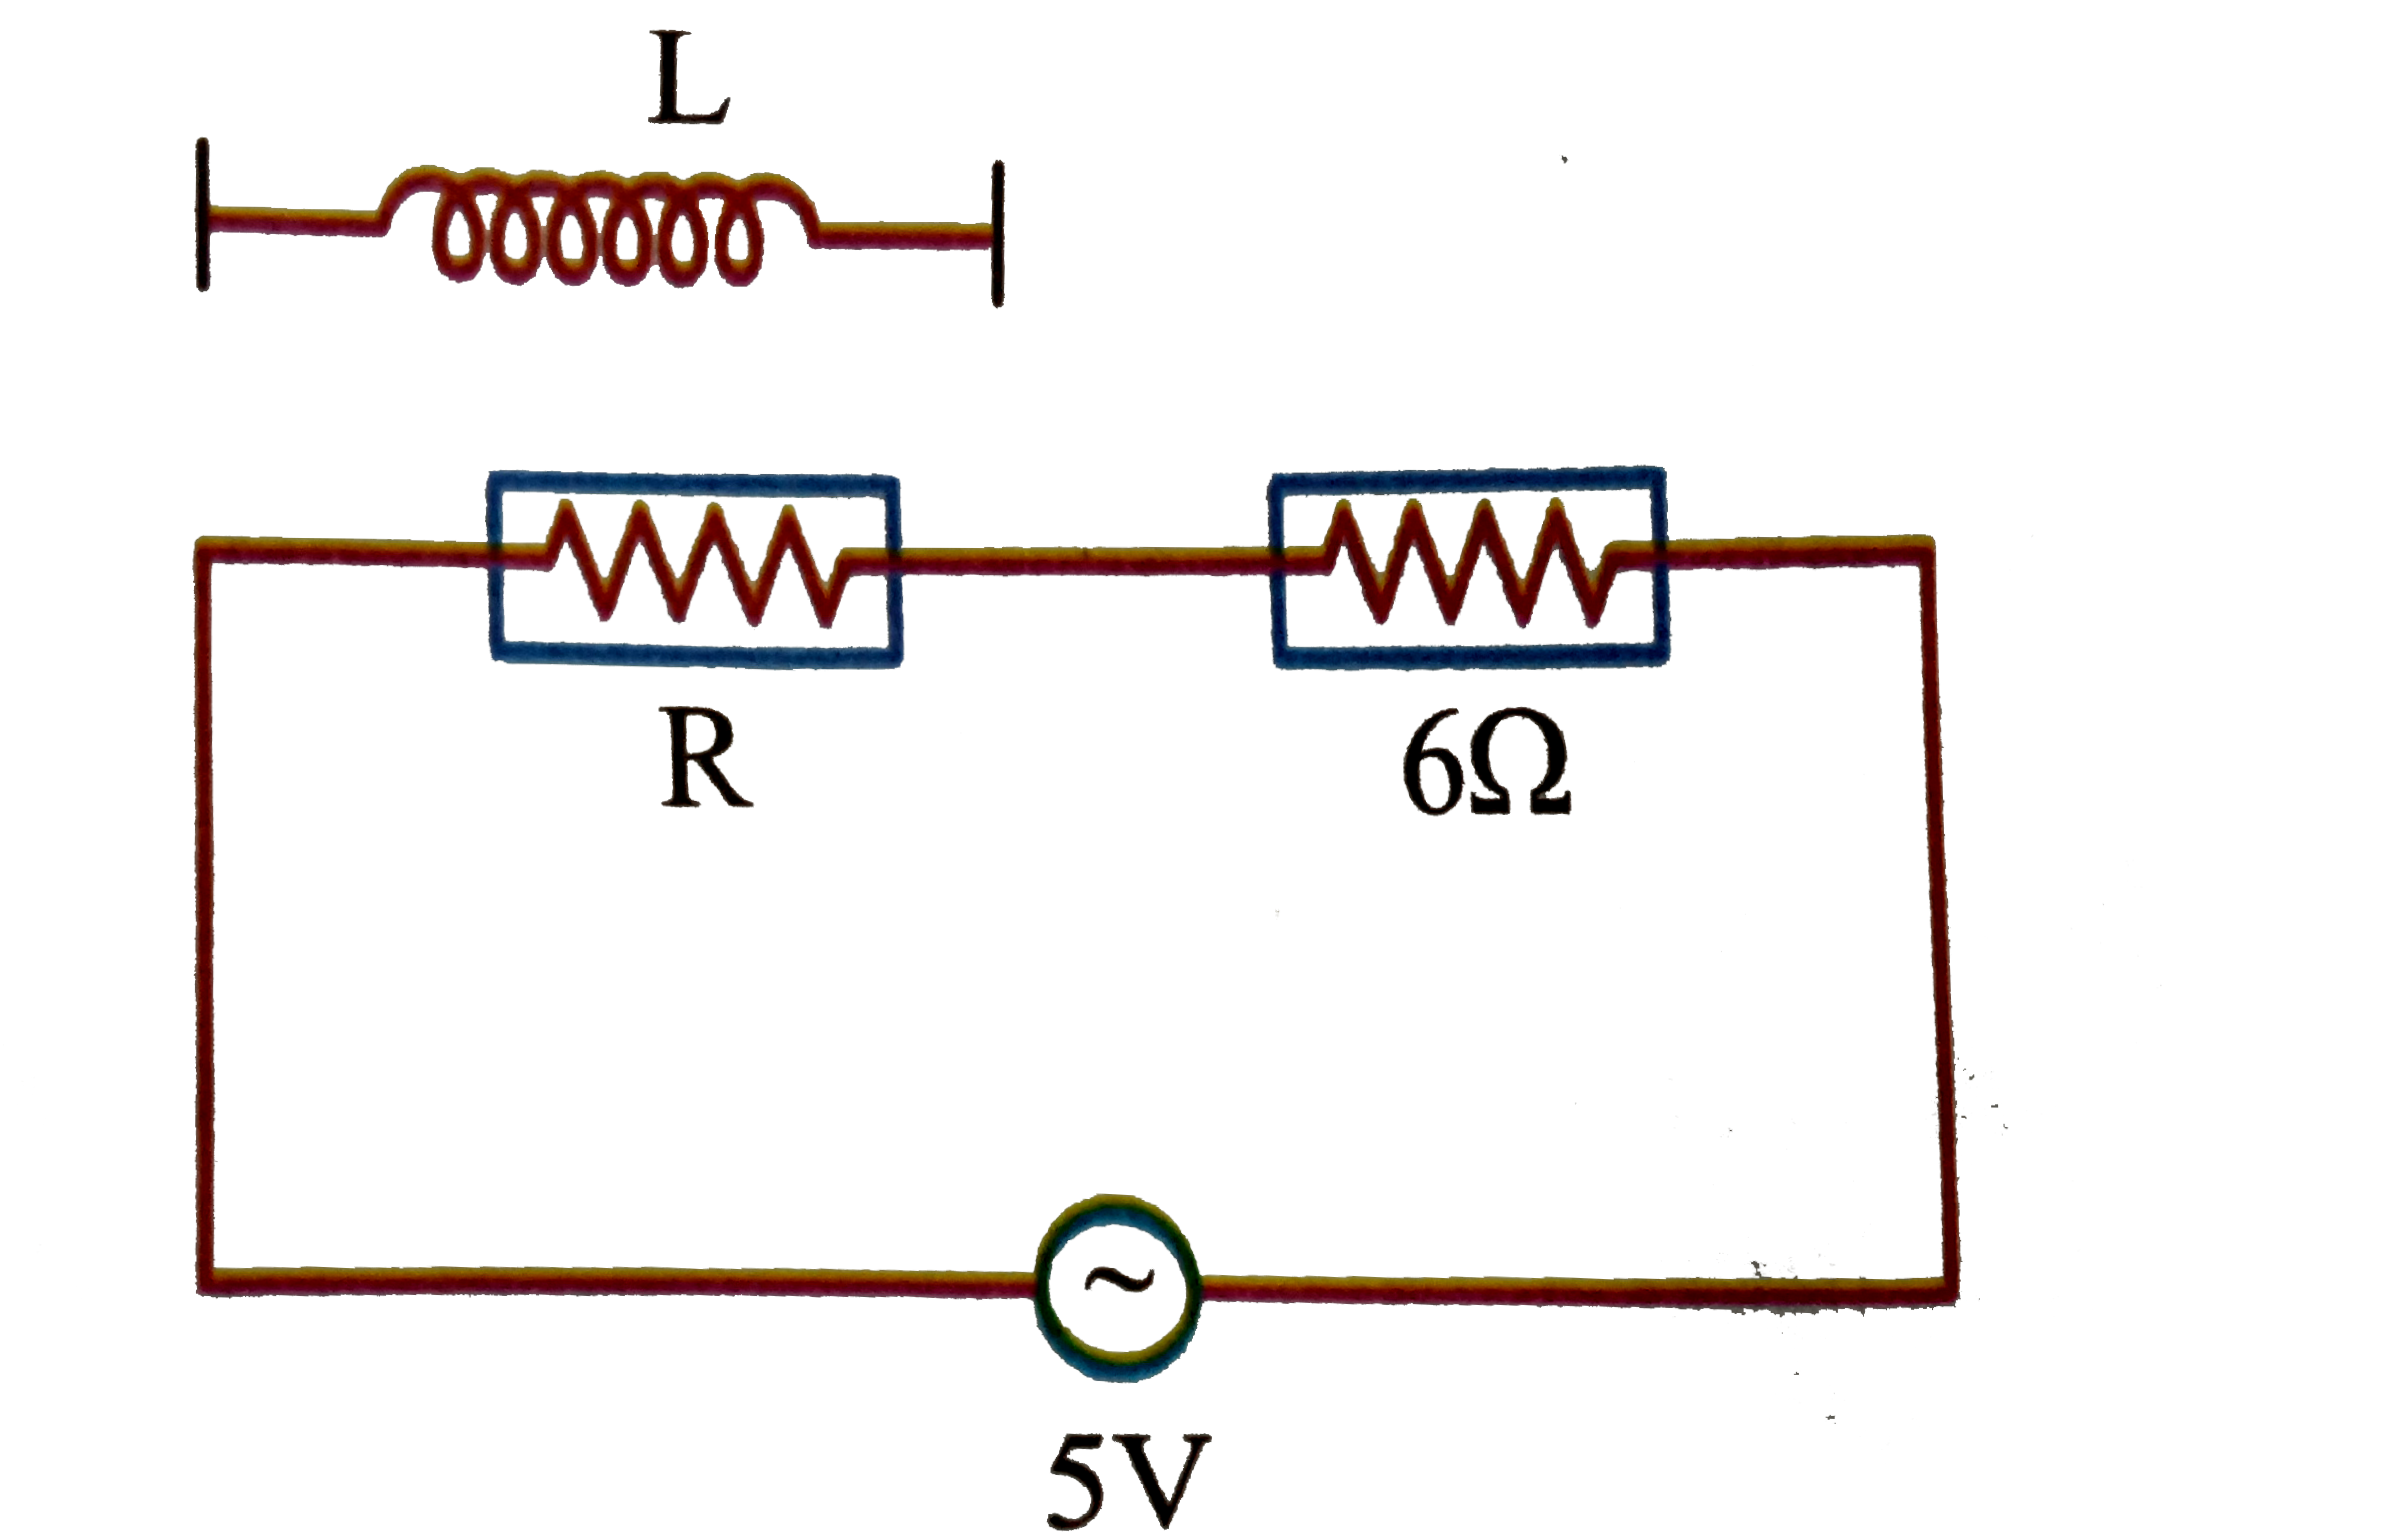 Two resistors are connected in series across 5V rms source of alternating potentail. The potential difference across 6 Omega resistor is 3 V(m). If R is replaced by a pure inductor L of such magnitude that current remains same, then the potential difference across L is